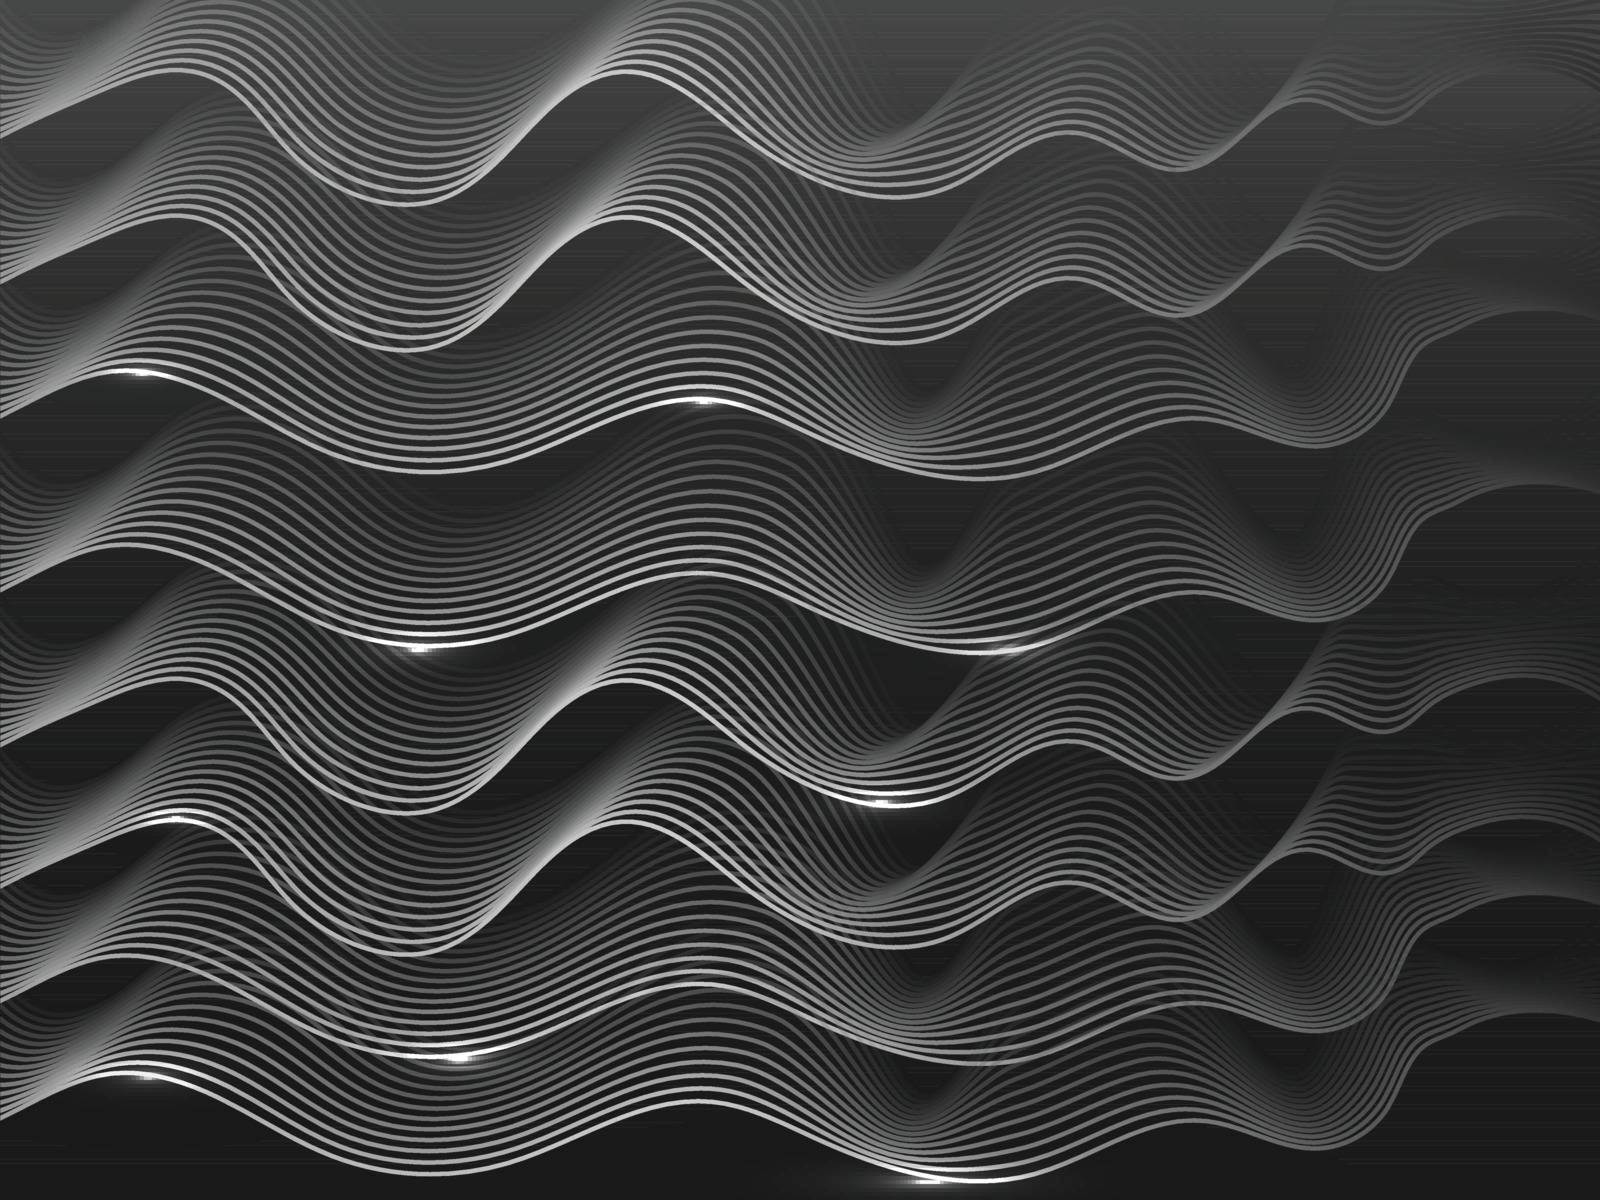 Animations of wave motion from particle field dance motion background for Futuristic digital rays concept.